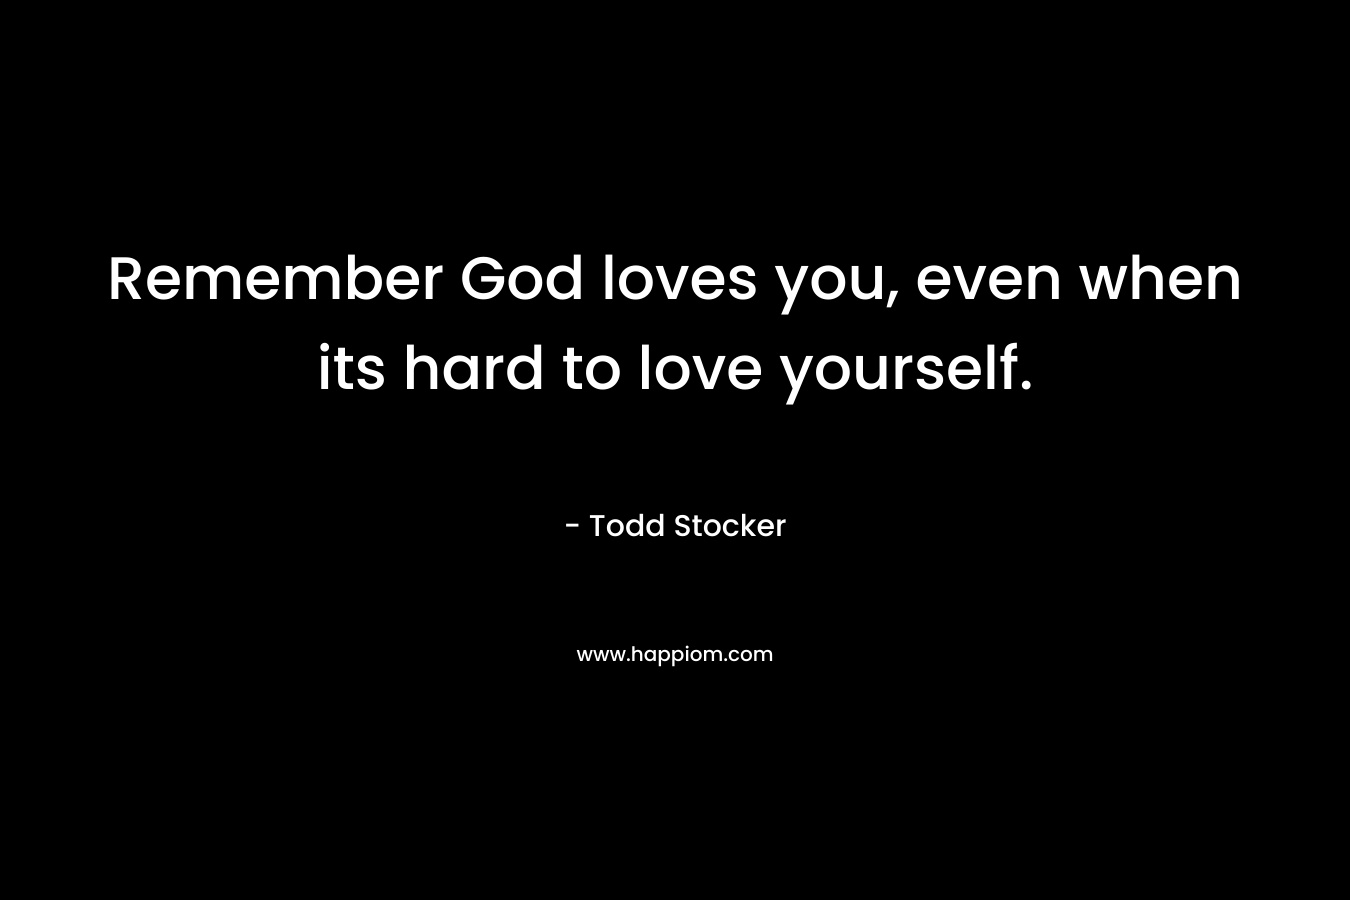 Remember God loves you, even when its hard to love yourself.